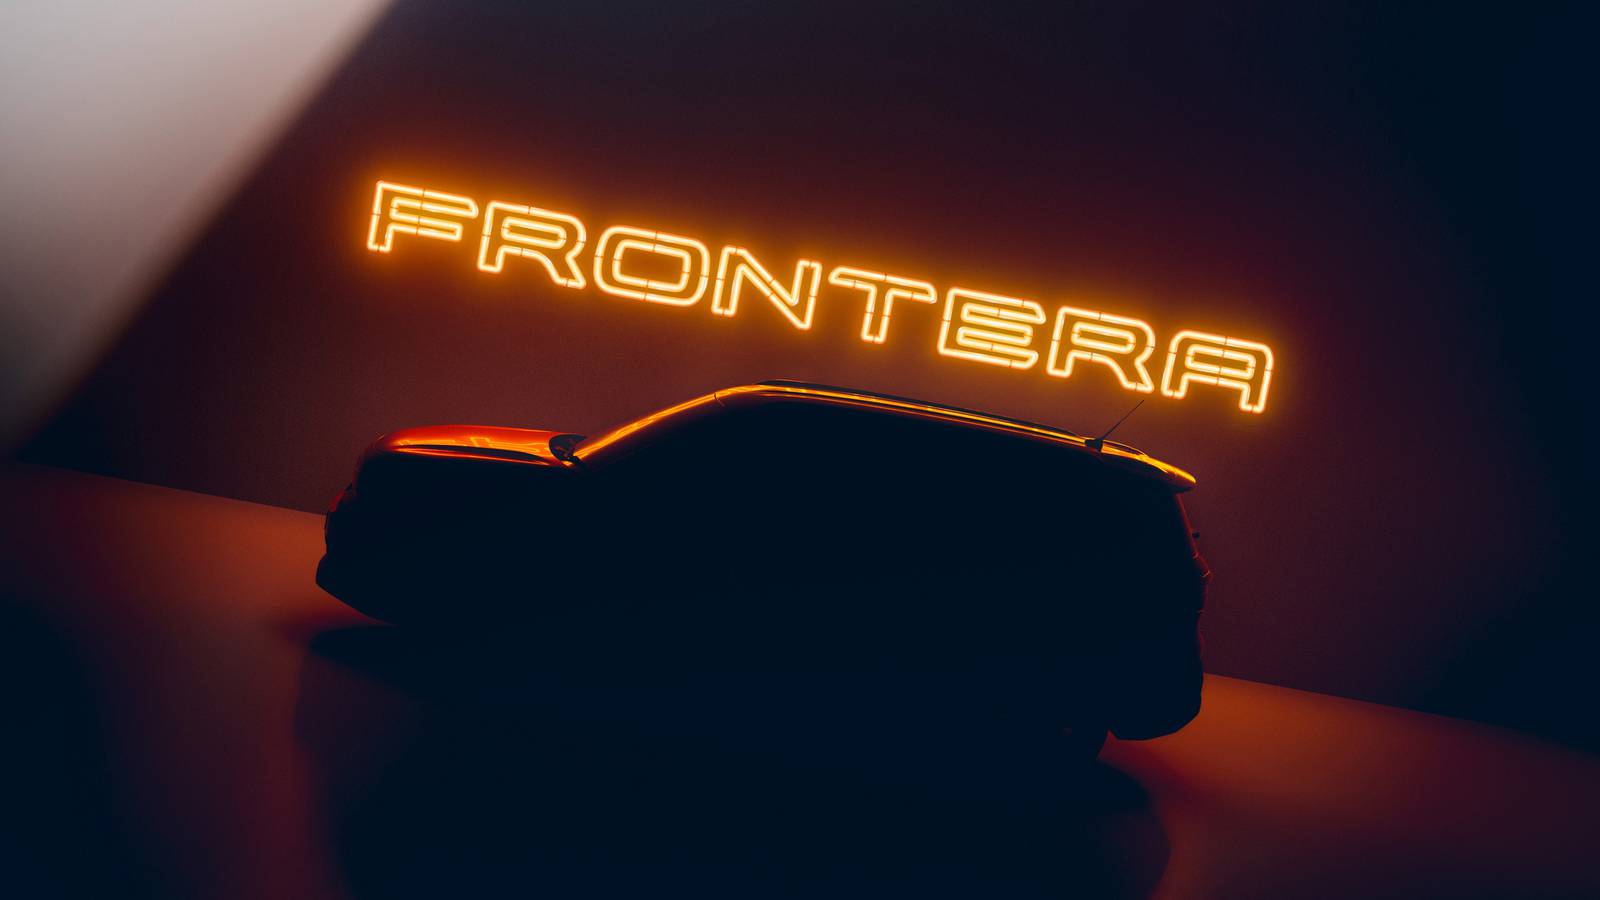 Opel is reviving its Frontera model name for a new car